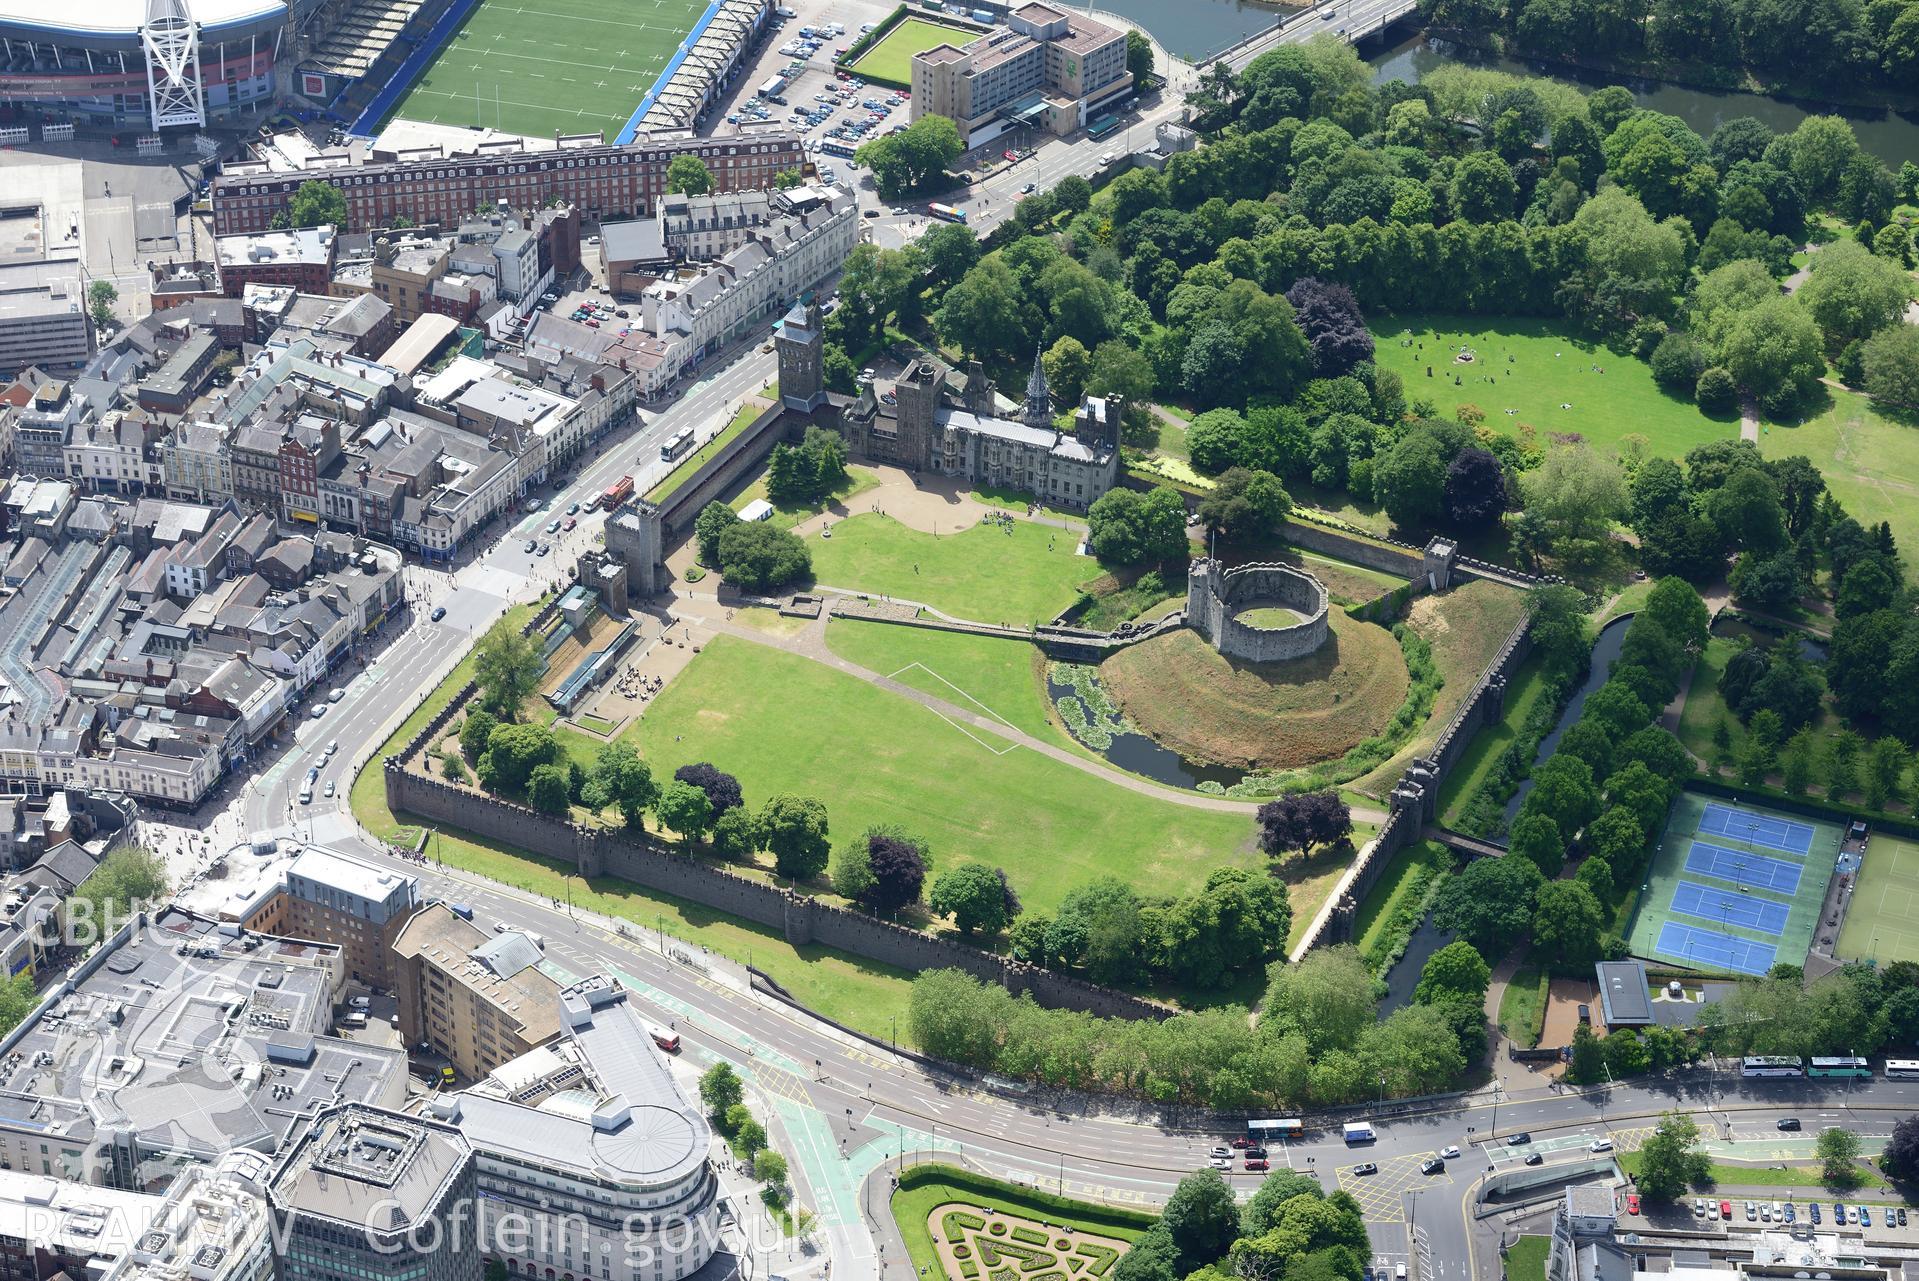 Cardiff Castle, Castle grounds, and the surrounding animal wall in Cardiff. Oblique aerial photograph taken during the Royal Commission's programme of archaeological aerial reconnaissance by Toby Driver on 29th June 2015.